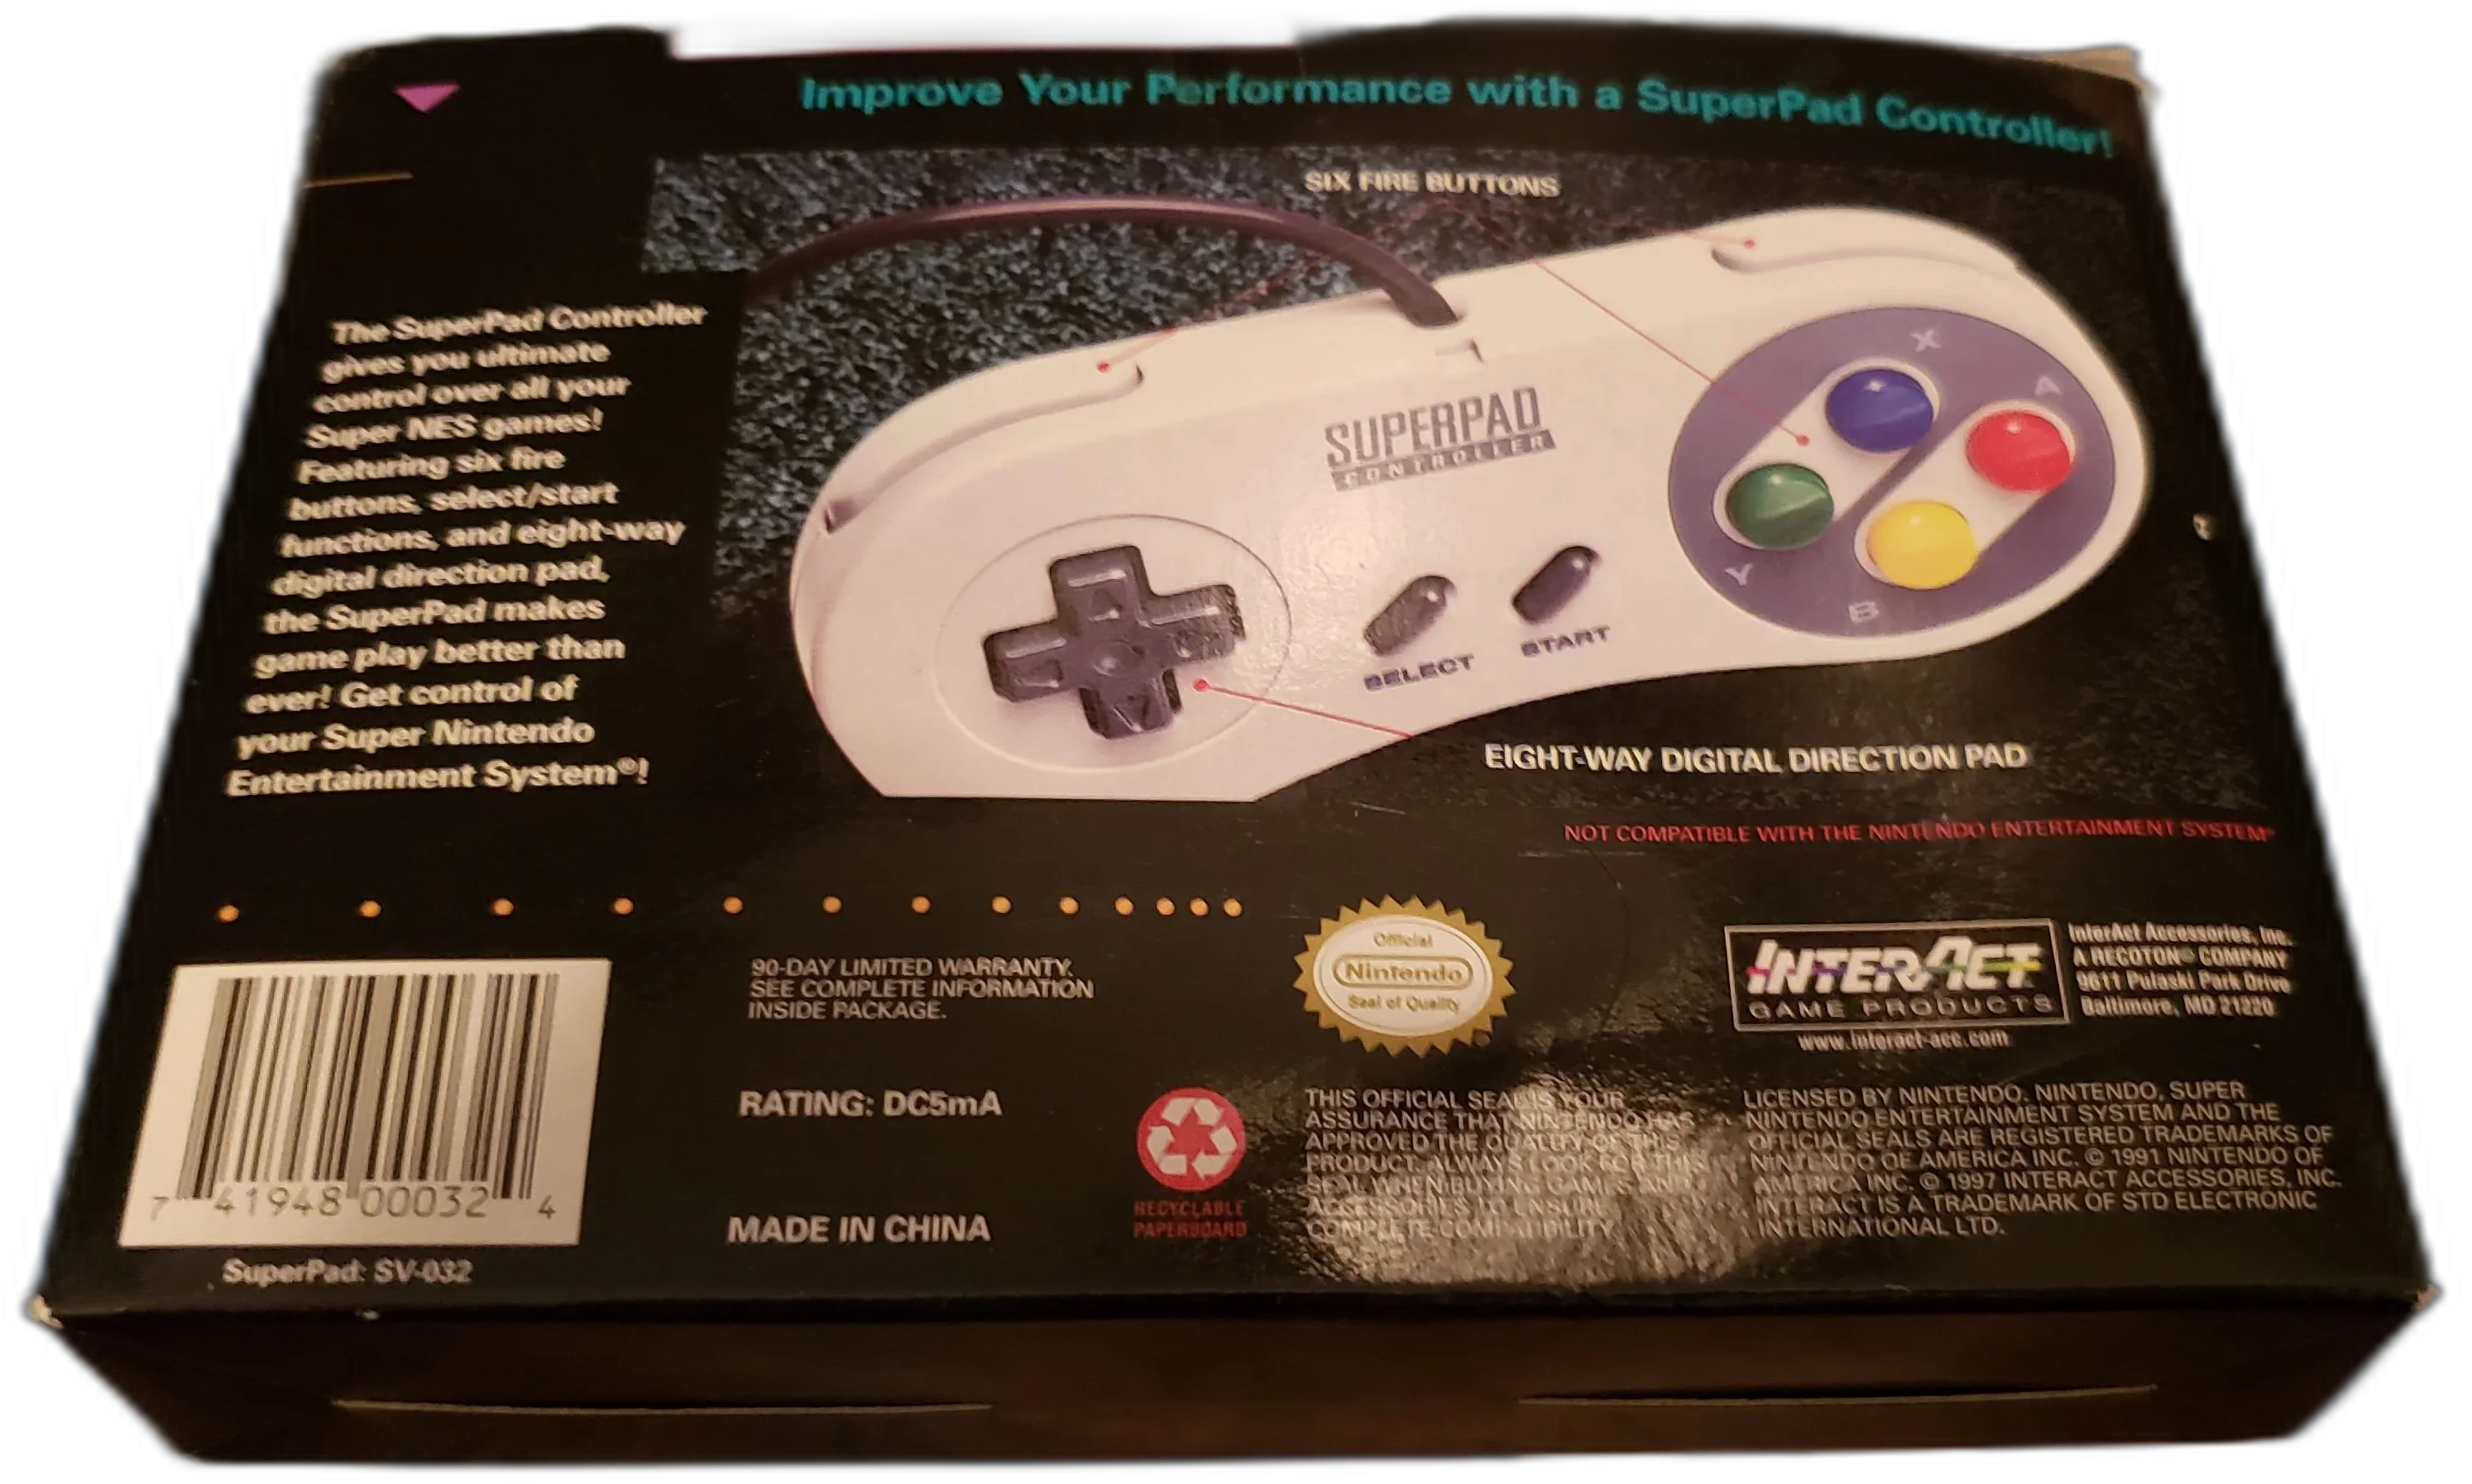  InterAct SNES SuperPad Controller